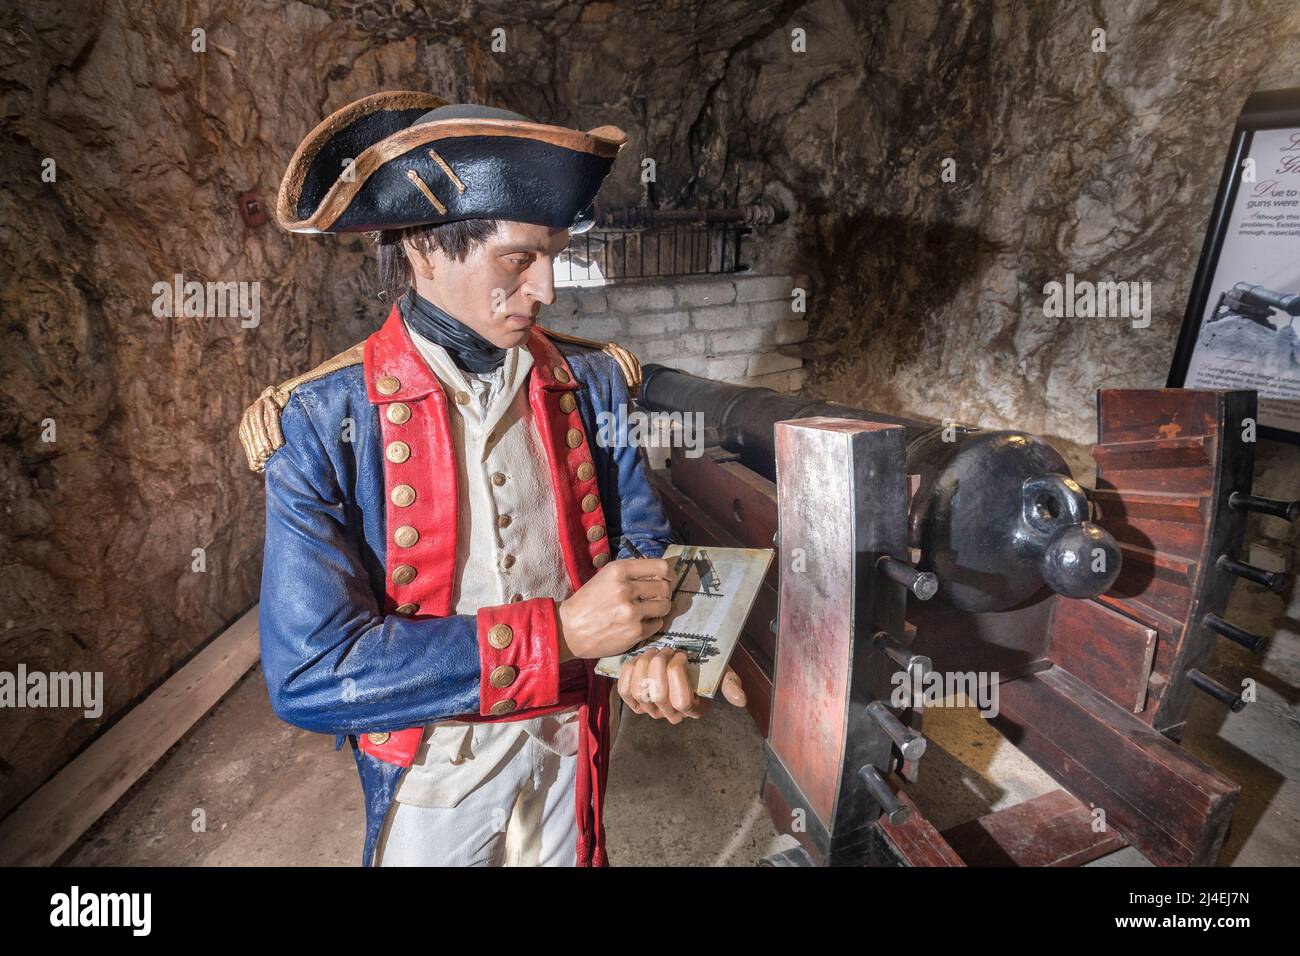 Lieutenant in 1760s uniform calculating use of Koehler's gun carriage at a cannon emplacement, Great Siege Tunnels, Gibraltar Stock Photo